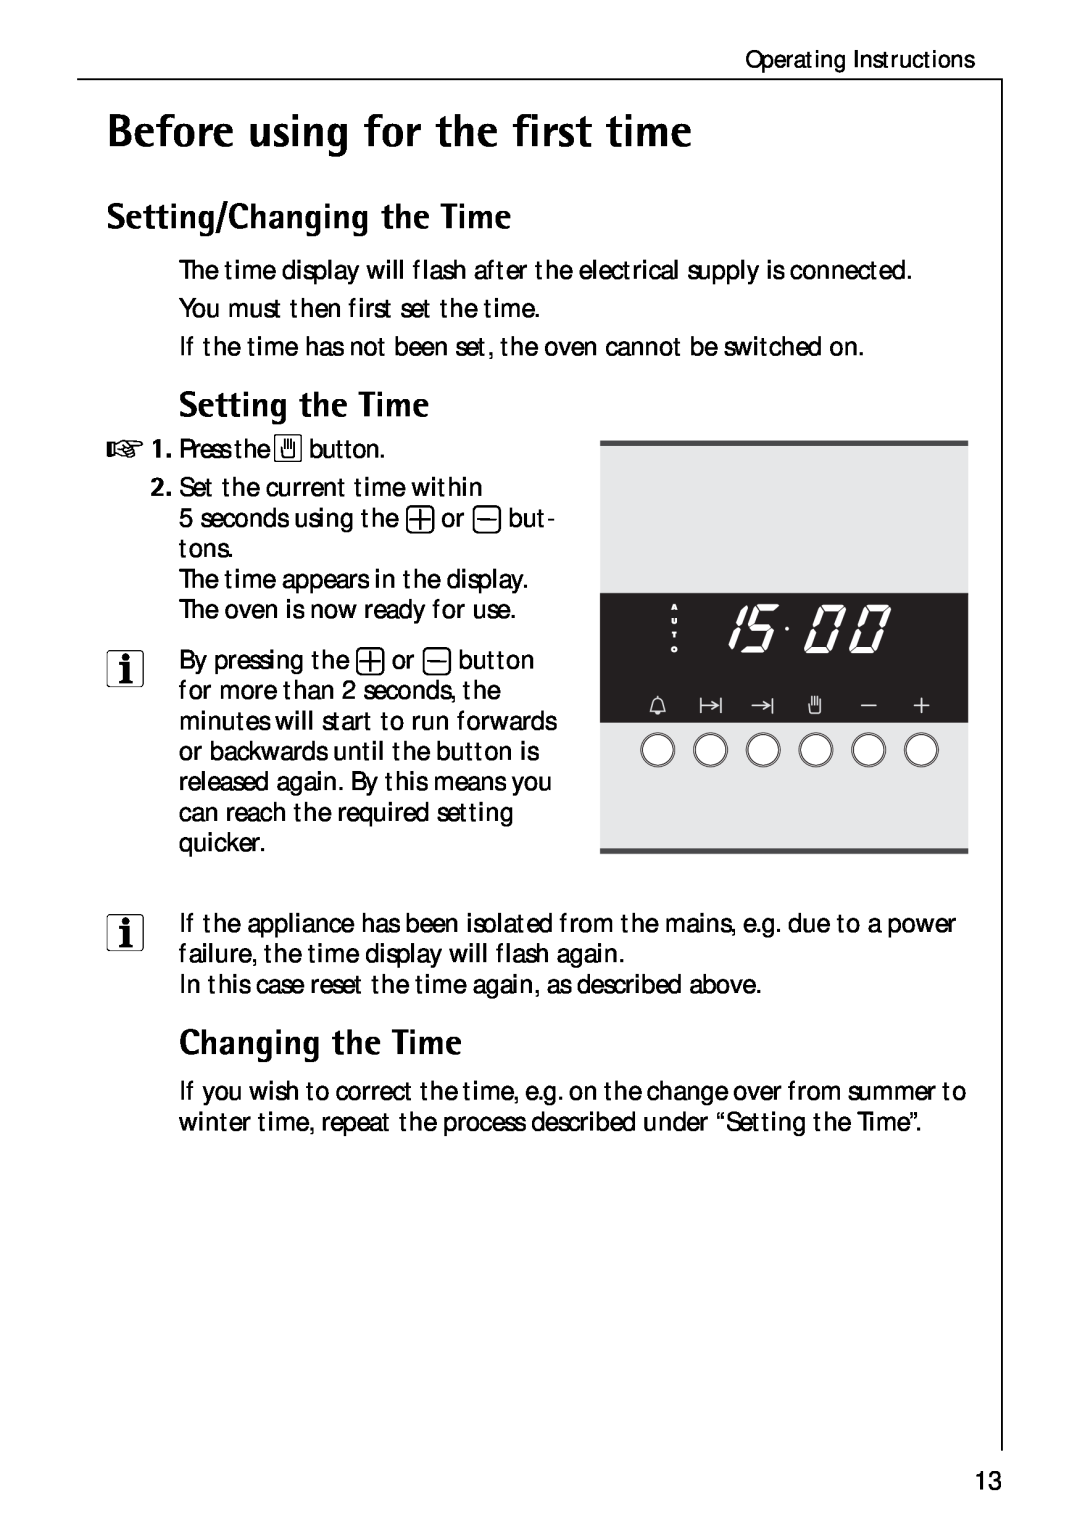 Electrolux B 4100 manual Before using for the first time, Setting/Changing the Time, Setting the Time 